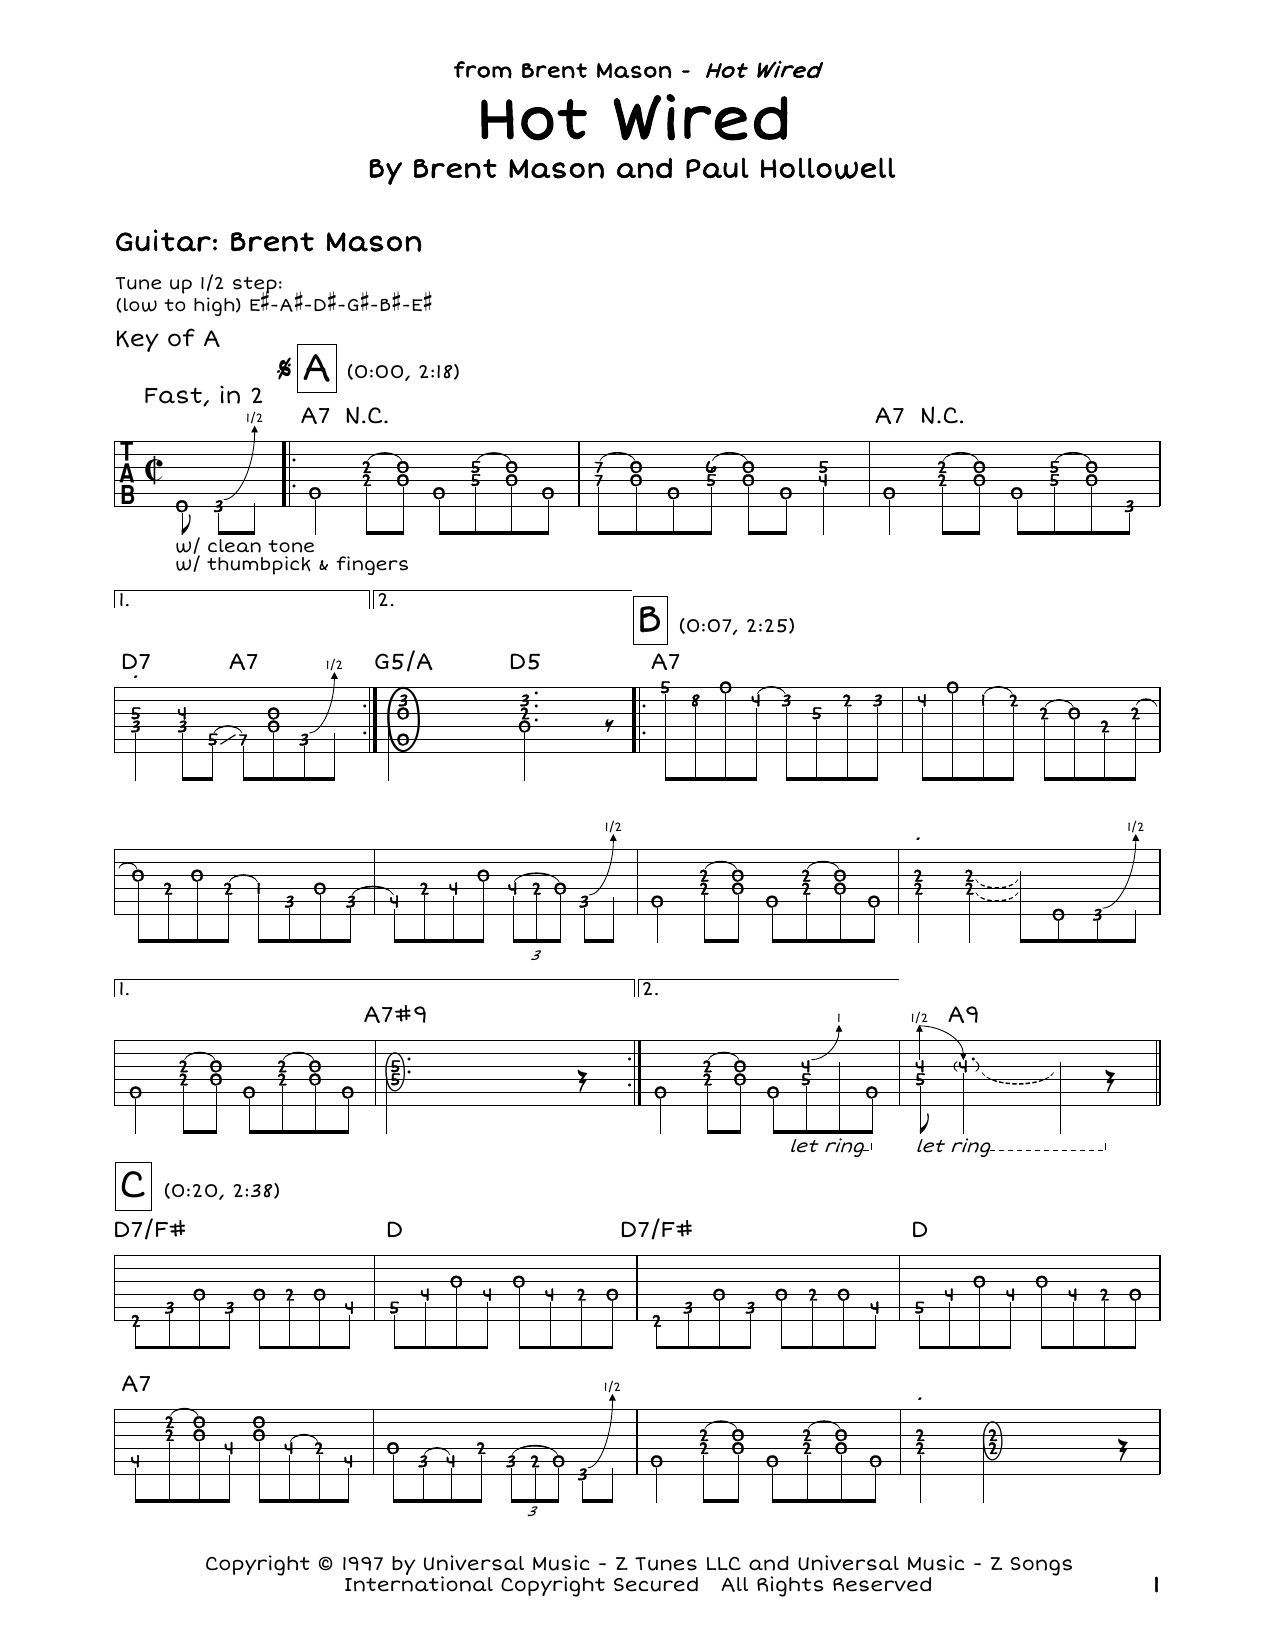 Download Brent Mason Hot Wired Sheet Music